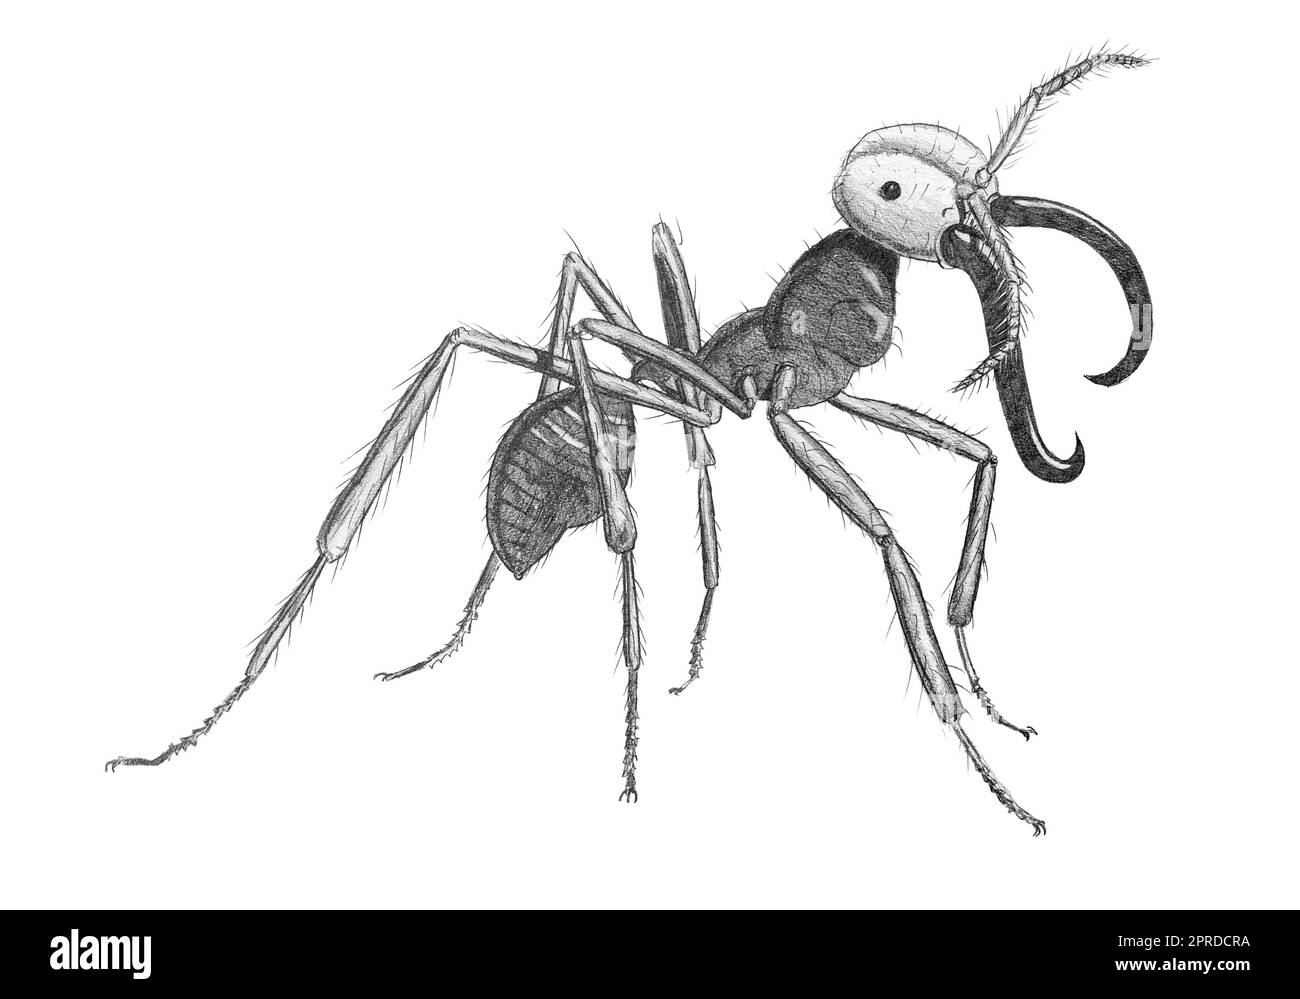 How to Draw Bullet Ant | Easy insects Drawings - YouTube